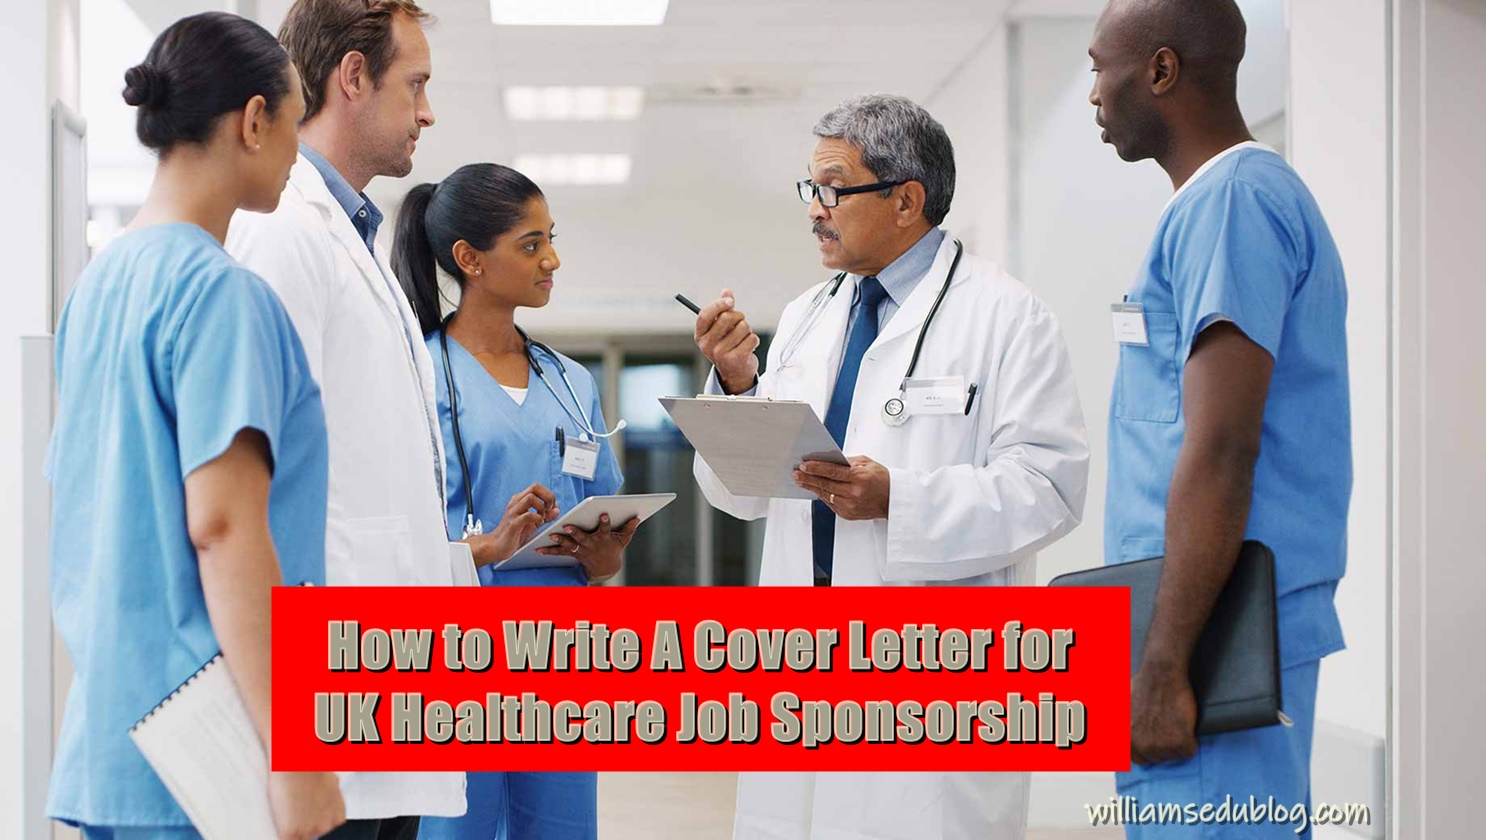 How to Write A Cover Letter for UK Healthcare Job Sponsorship